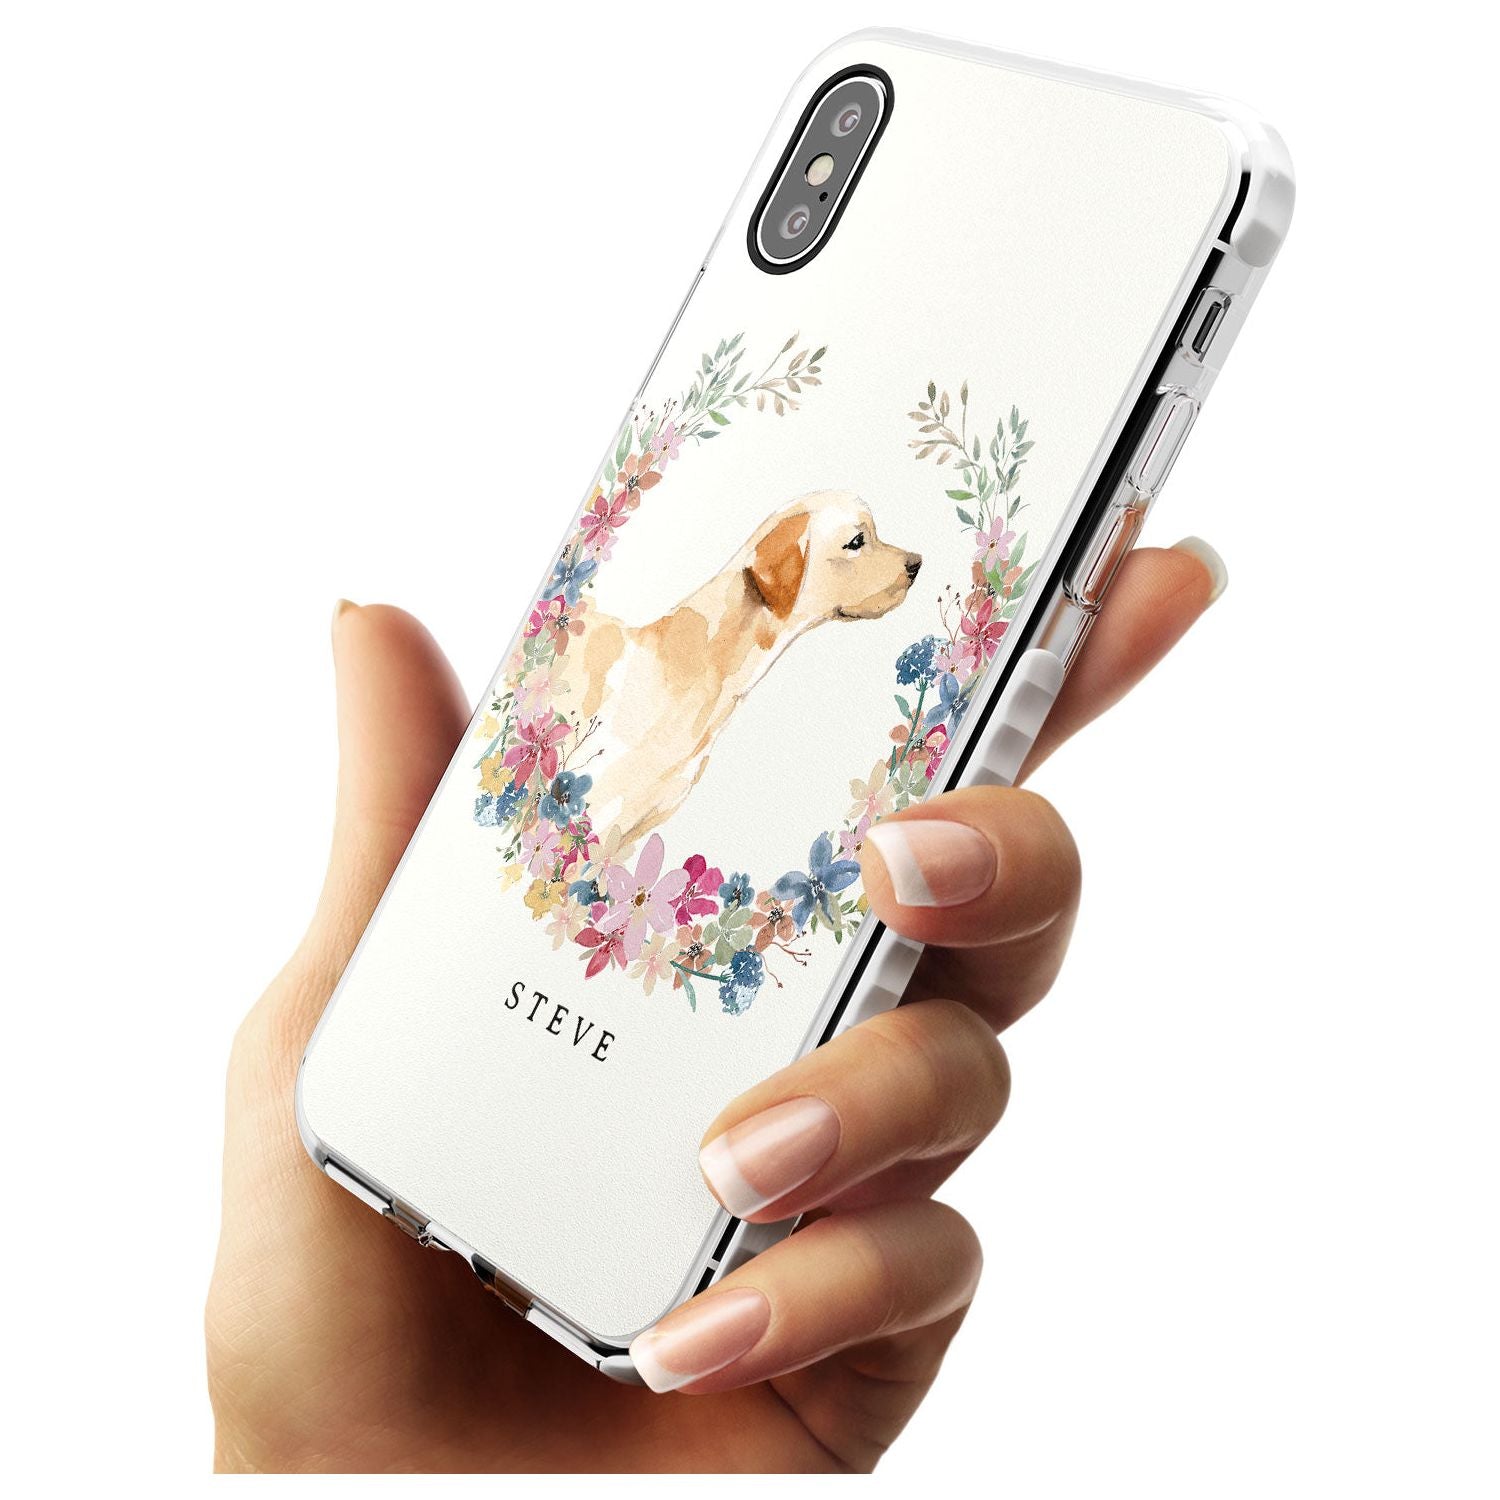 Yellow Labrador - Watercolour Dog Portrait Impact Phone Case for iPhone X XS Max XR